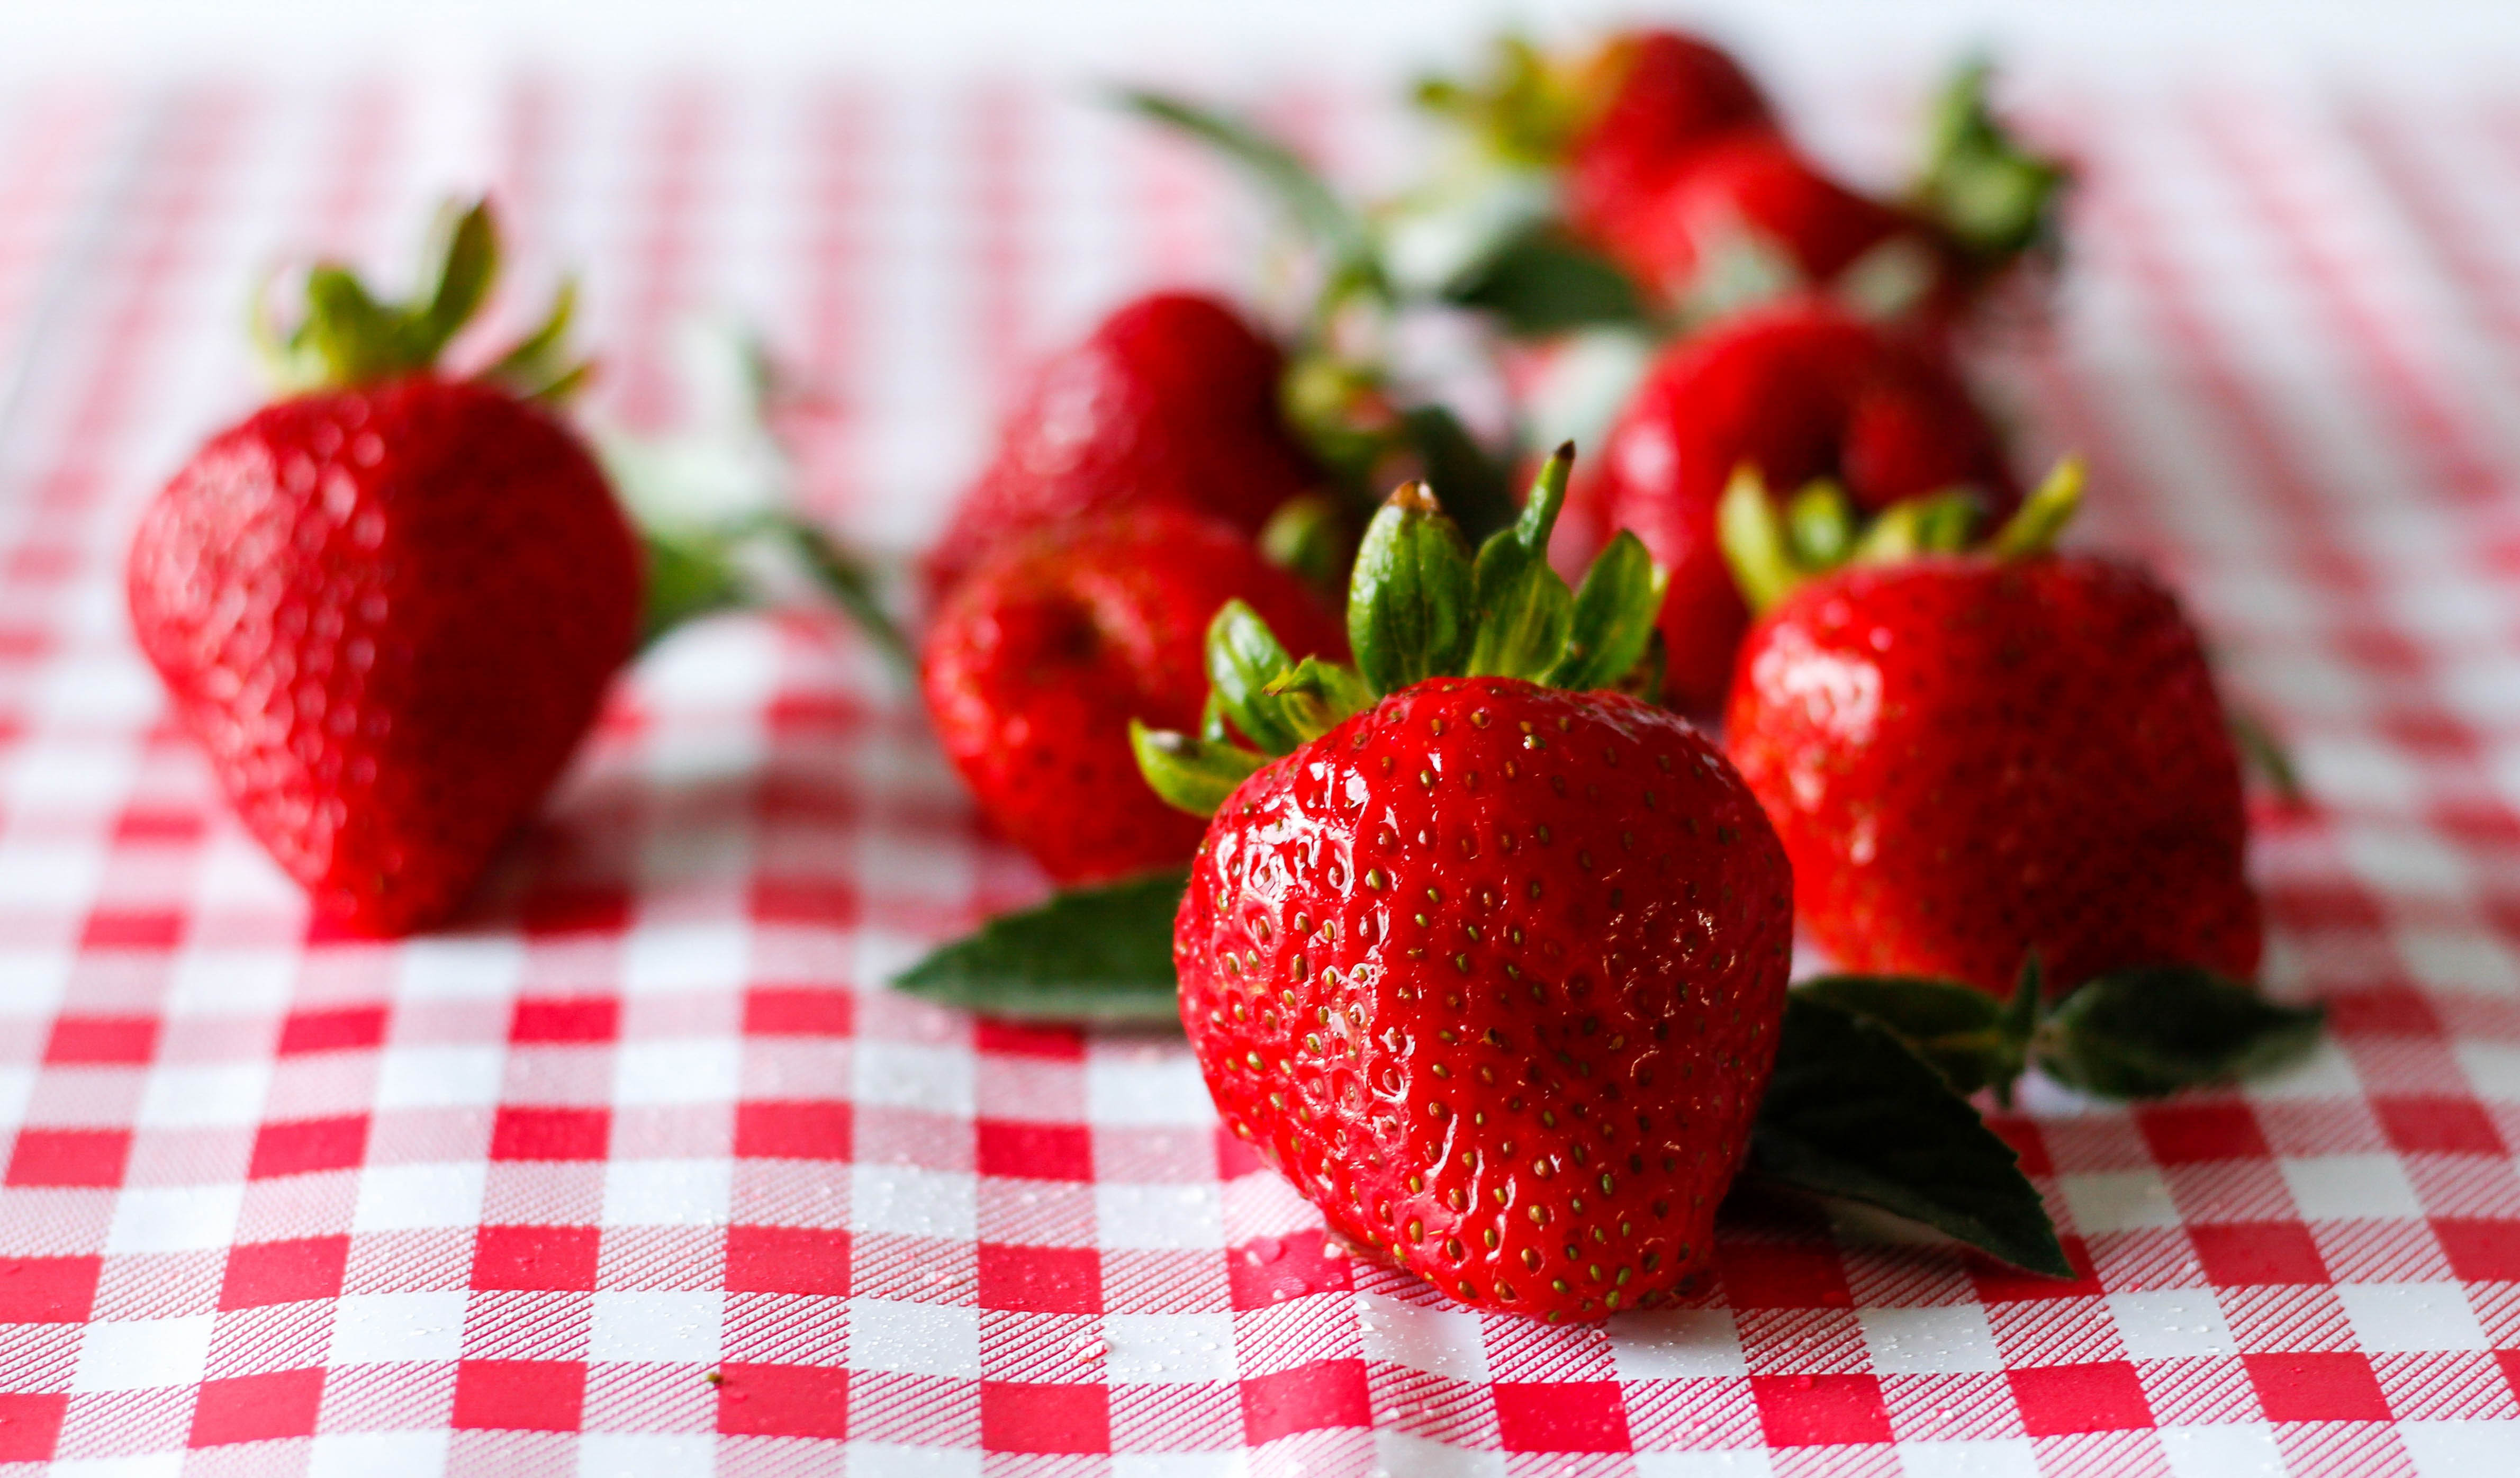 118060 download wallpaper food, strawberry, red, berry, ripe, juicy screensavers and pictures for free